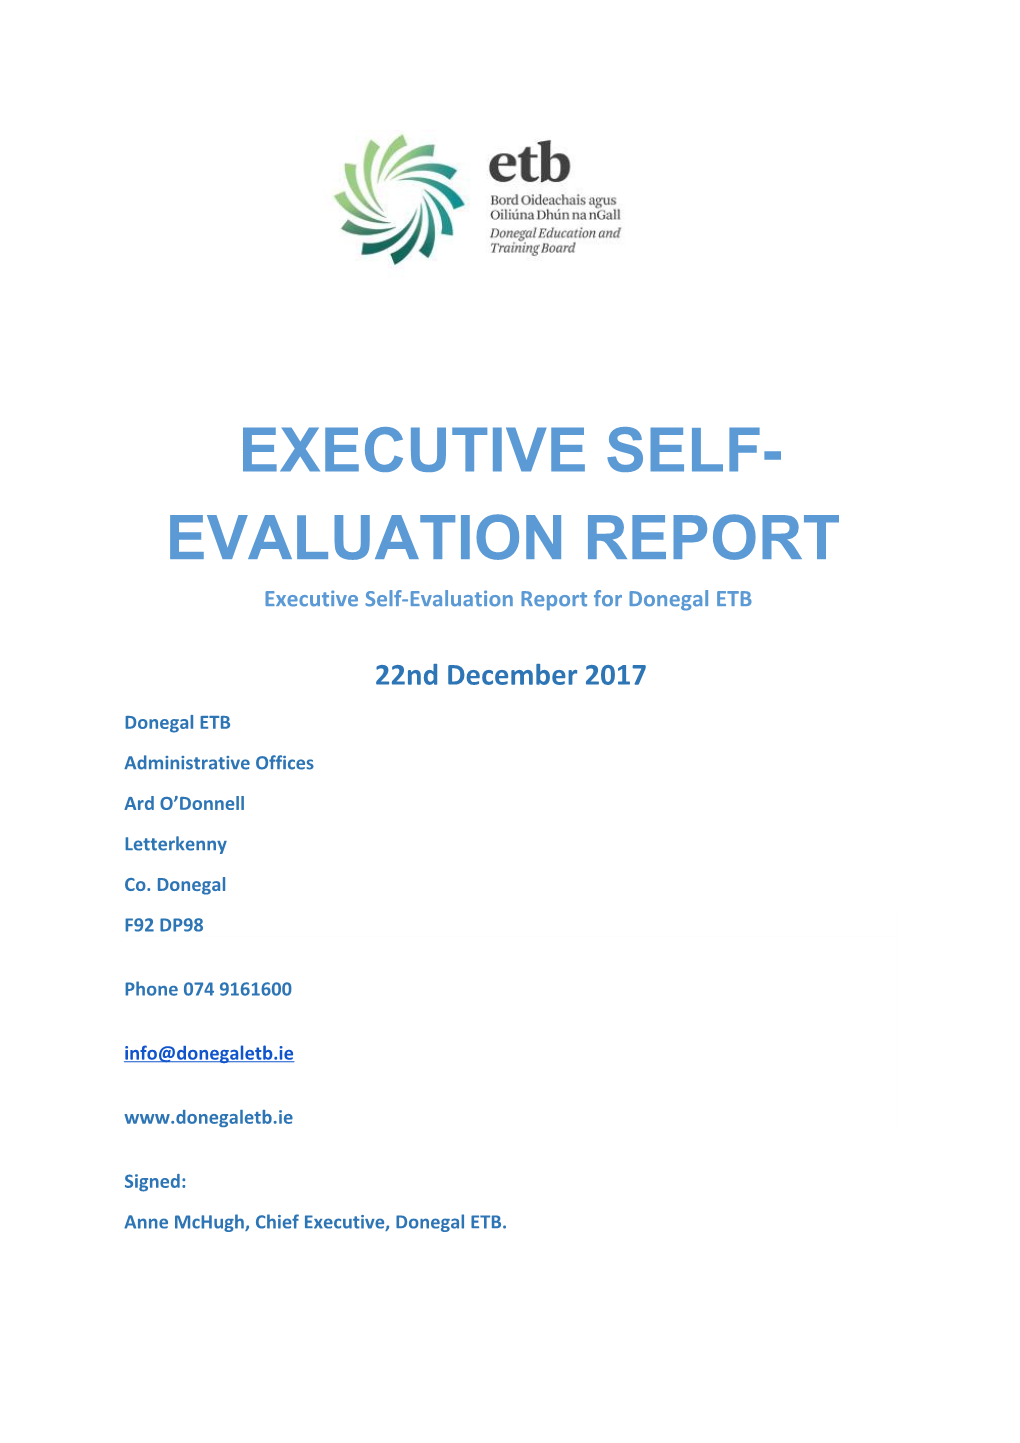 Executive Self-Evaluation Report for Donegal ETB